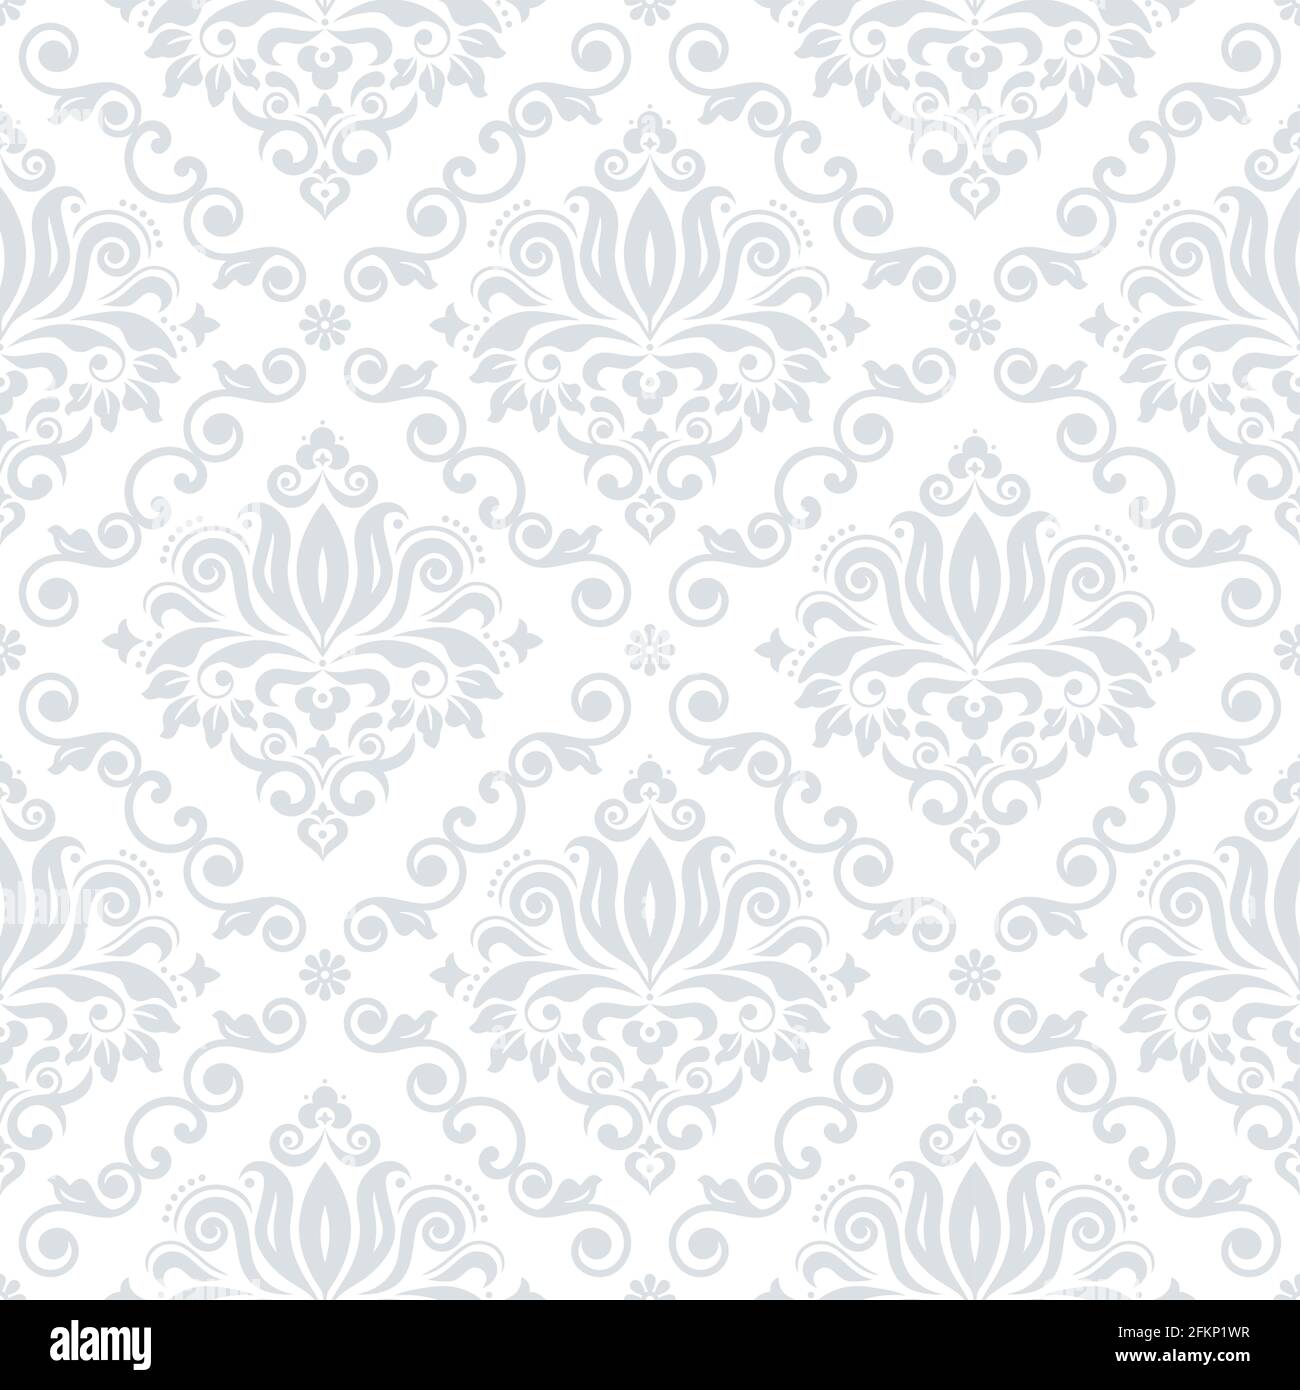 Classic damask wallpaper or fabric print pattern retro textile vector design royal elegant decor is silver gray on white background stock vector image art